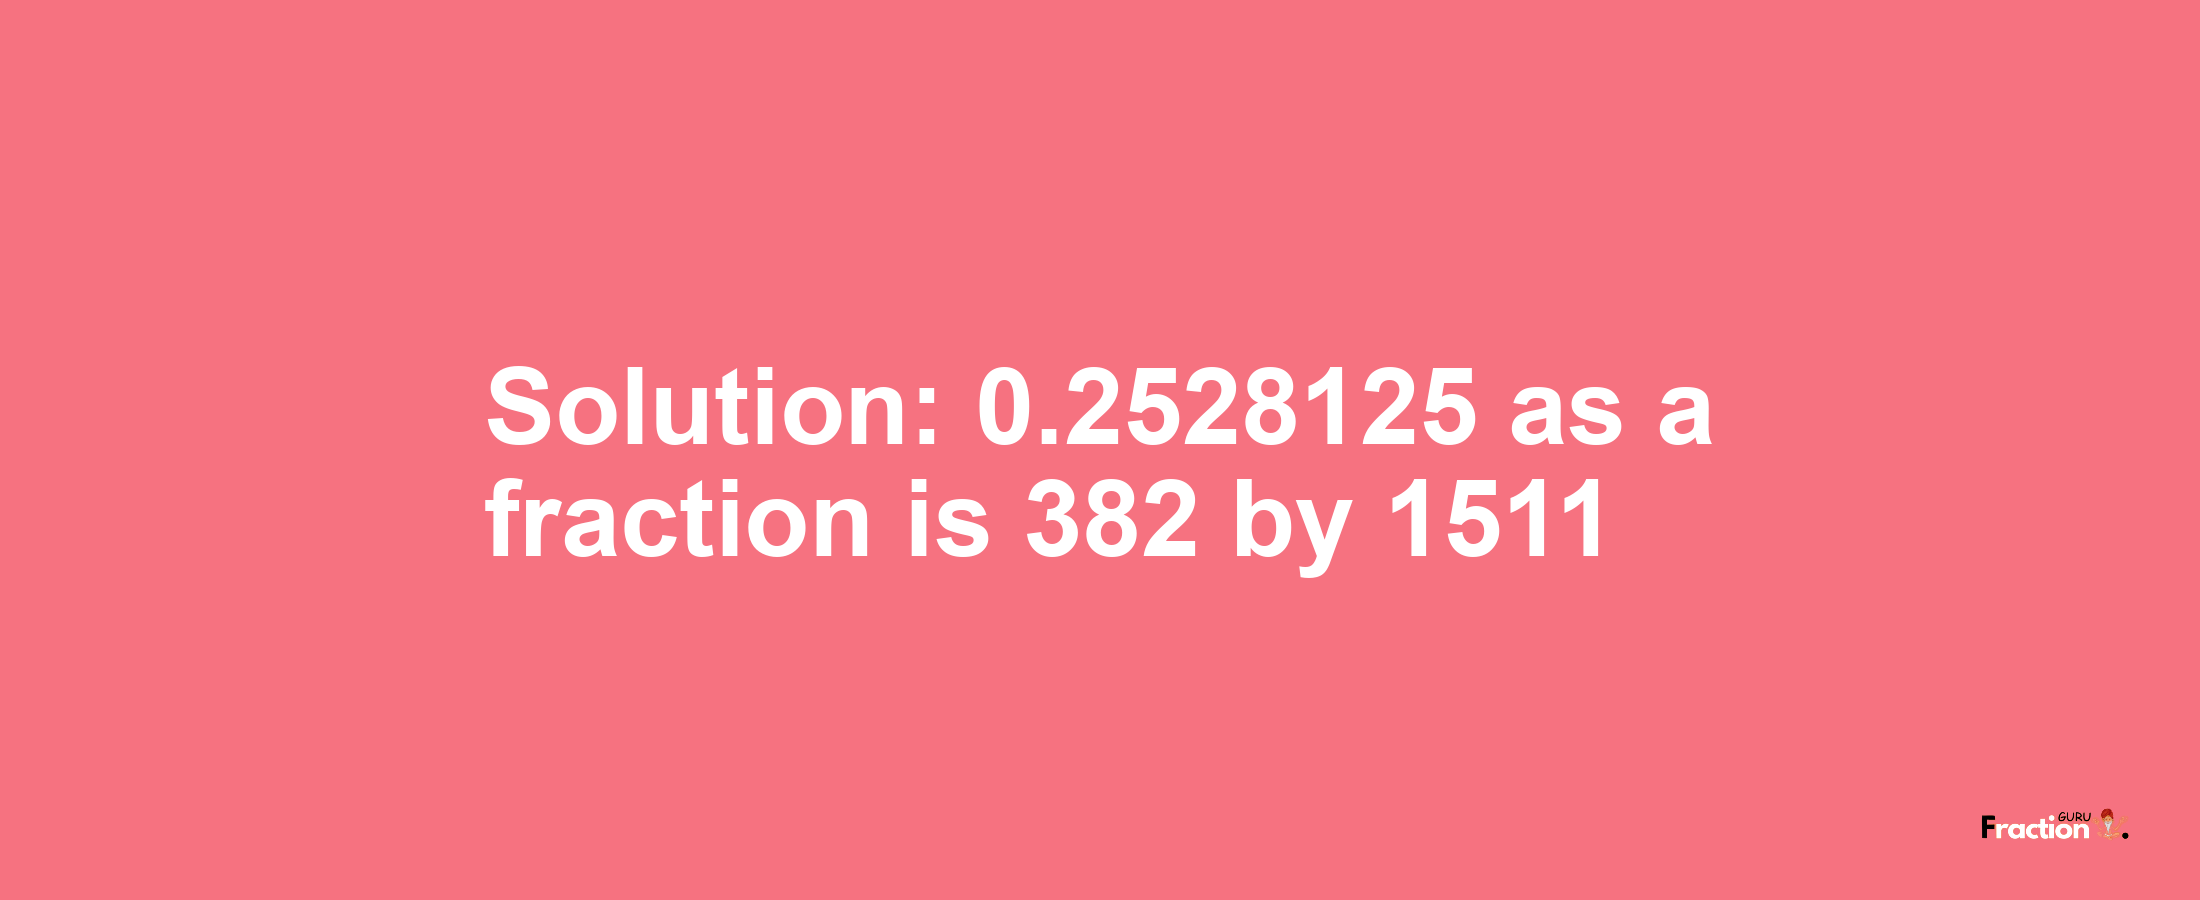 Solution:0.2528125 as a fraction is 382/1511